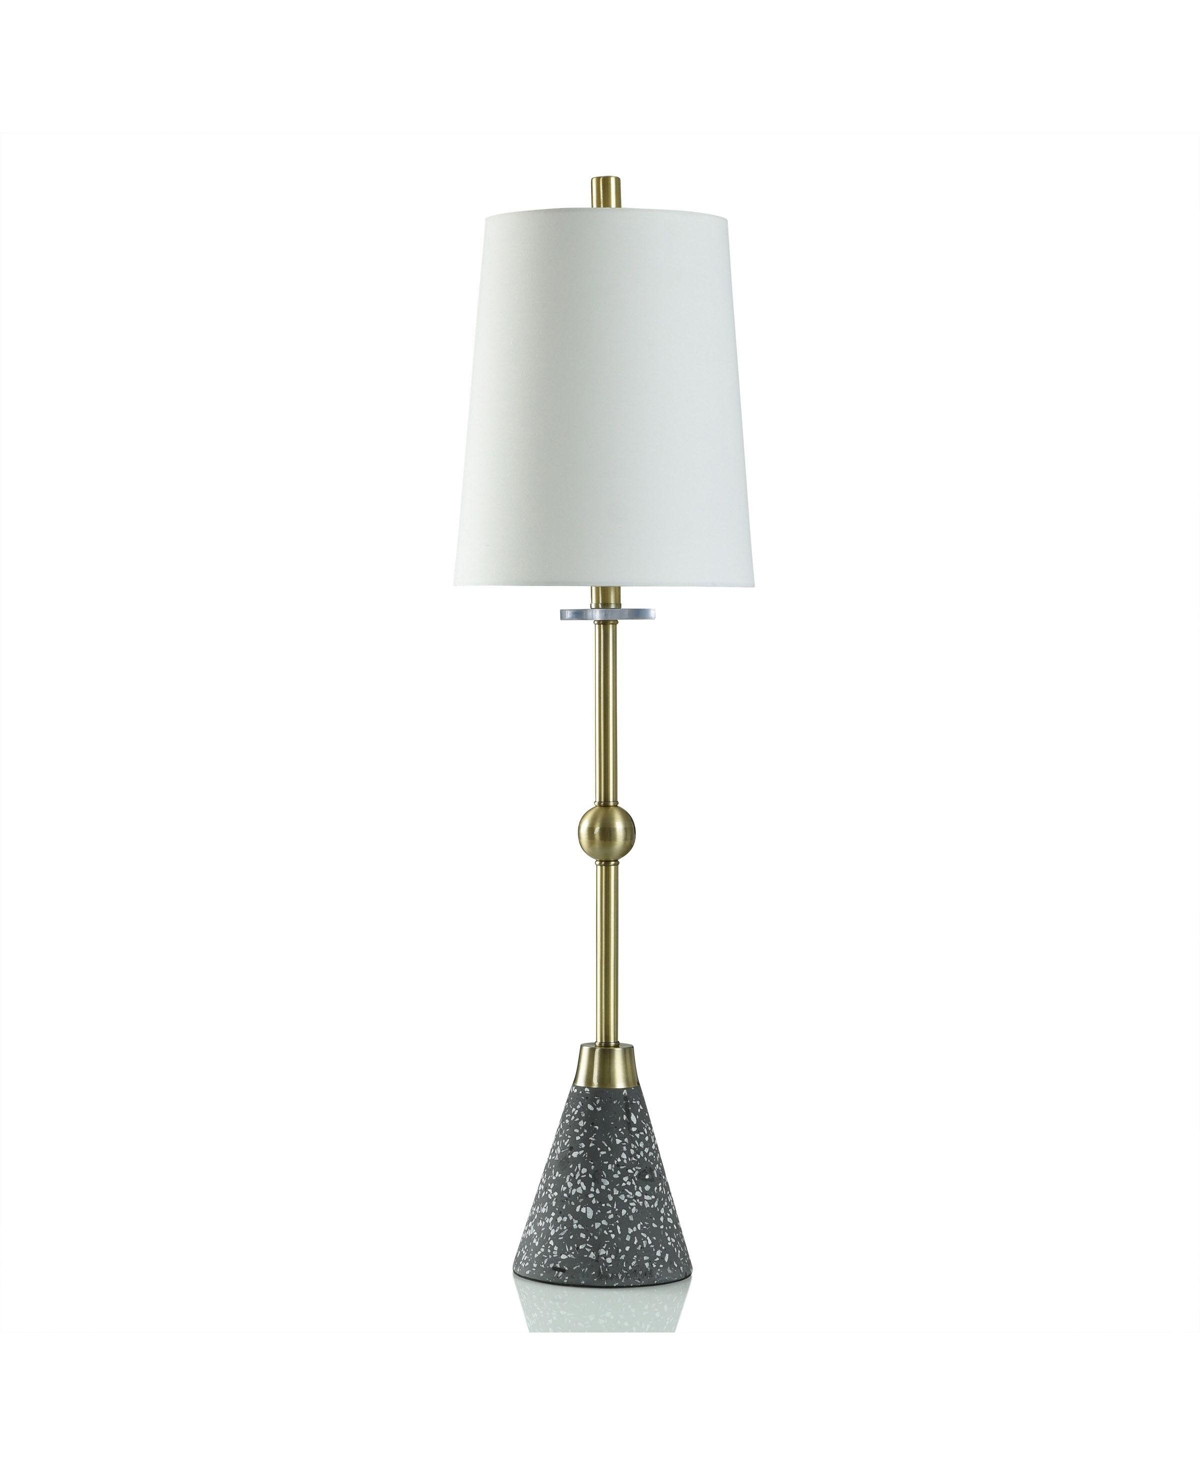 Stylecraft Home Collection 36.25" Tazzo Slim Bar With Table Lamp In Gray,white Terrazo Cement,gold Brushed